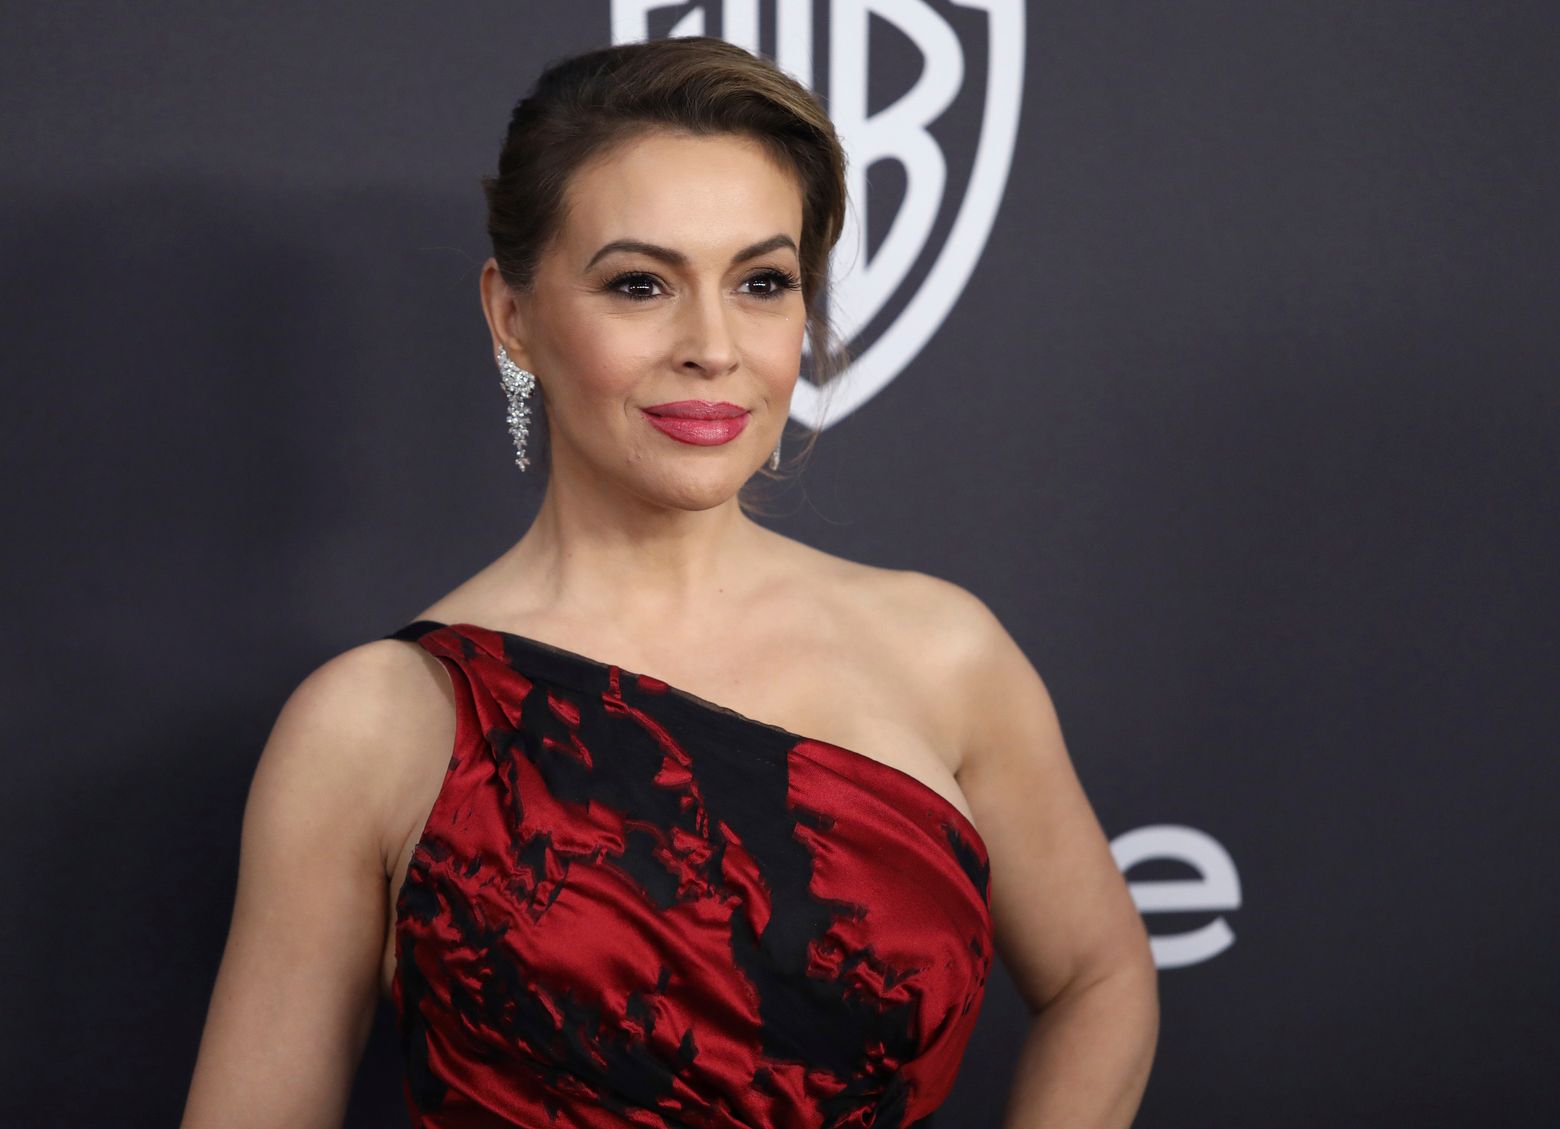 Sex With Women Alyssa Milano - Citing 'war on women,' Alyssa Milano calls for sex strike, ignites social  media | The Seattle Times